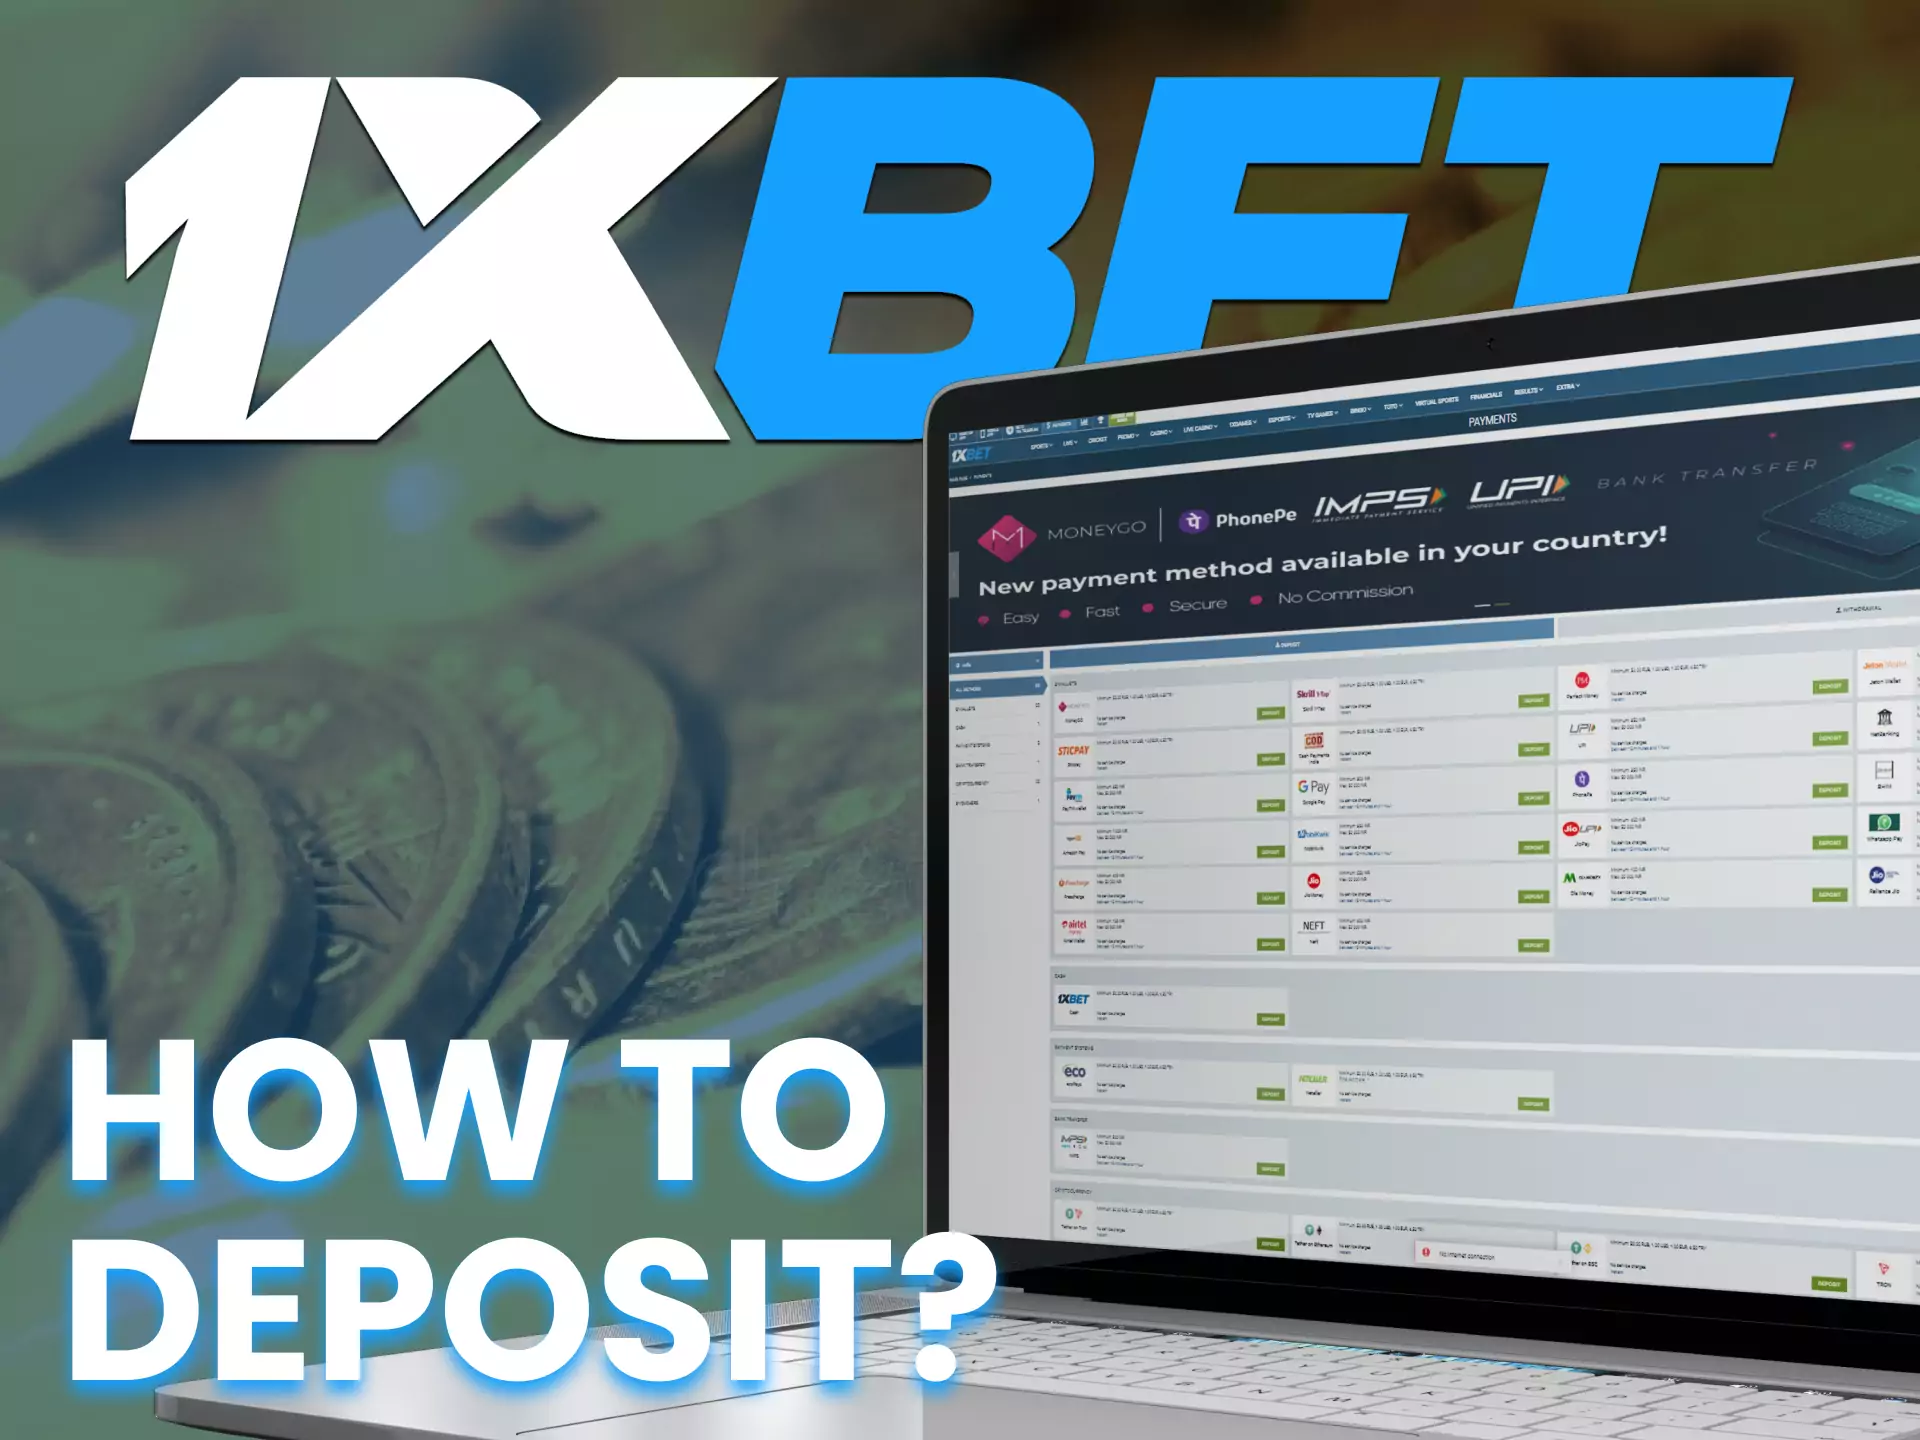 At 1XBET you can easily deposit your account with these instructions.